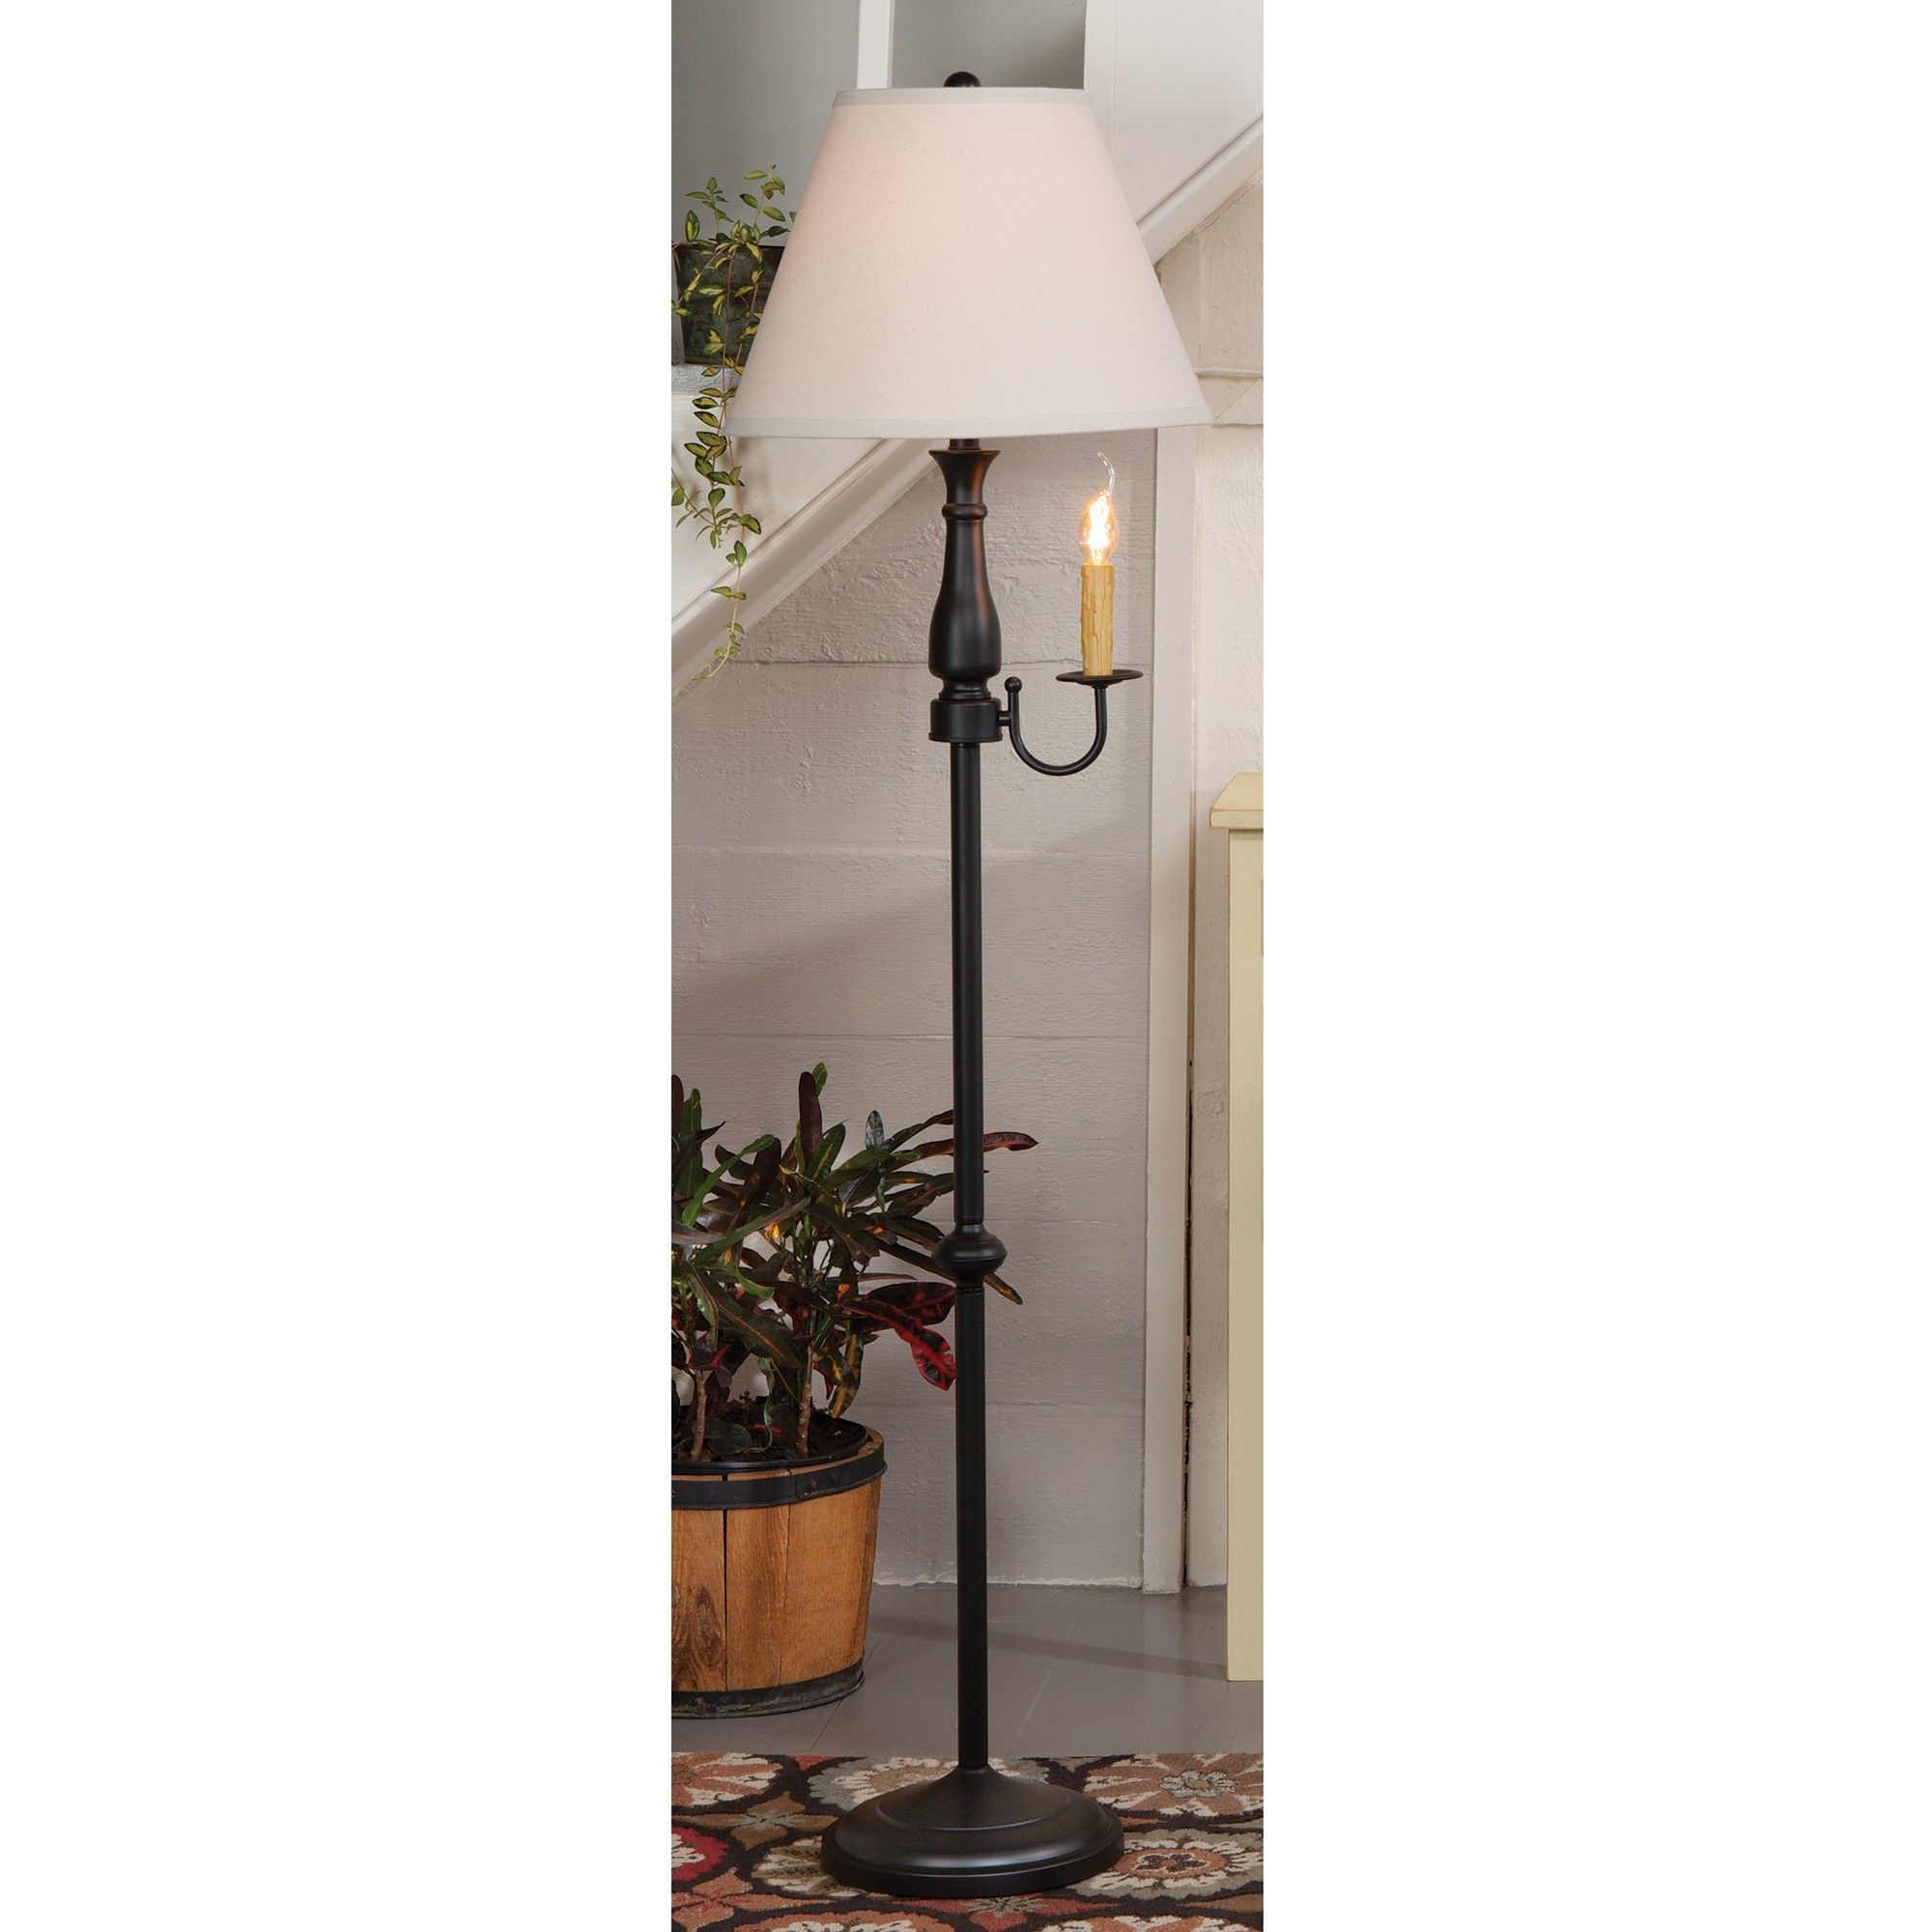 Country Floor Lamps With Taper Candle Sturbridge Yankee inside sizing 2000 X 2000